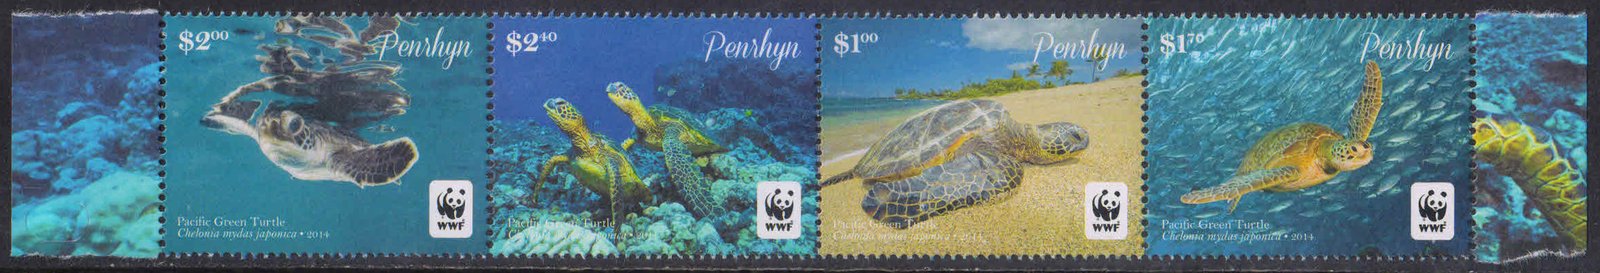 PENRHYN ISLAND 2014 - Endangered Species, Pacific Green Turtles on Sea Bed, Marine Life, WWF, Set of 4 Stamps, MNH, S.G. 645-648, Cat � 10